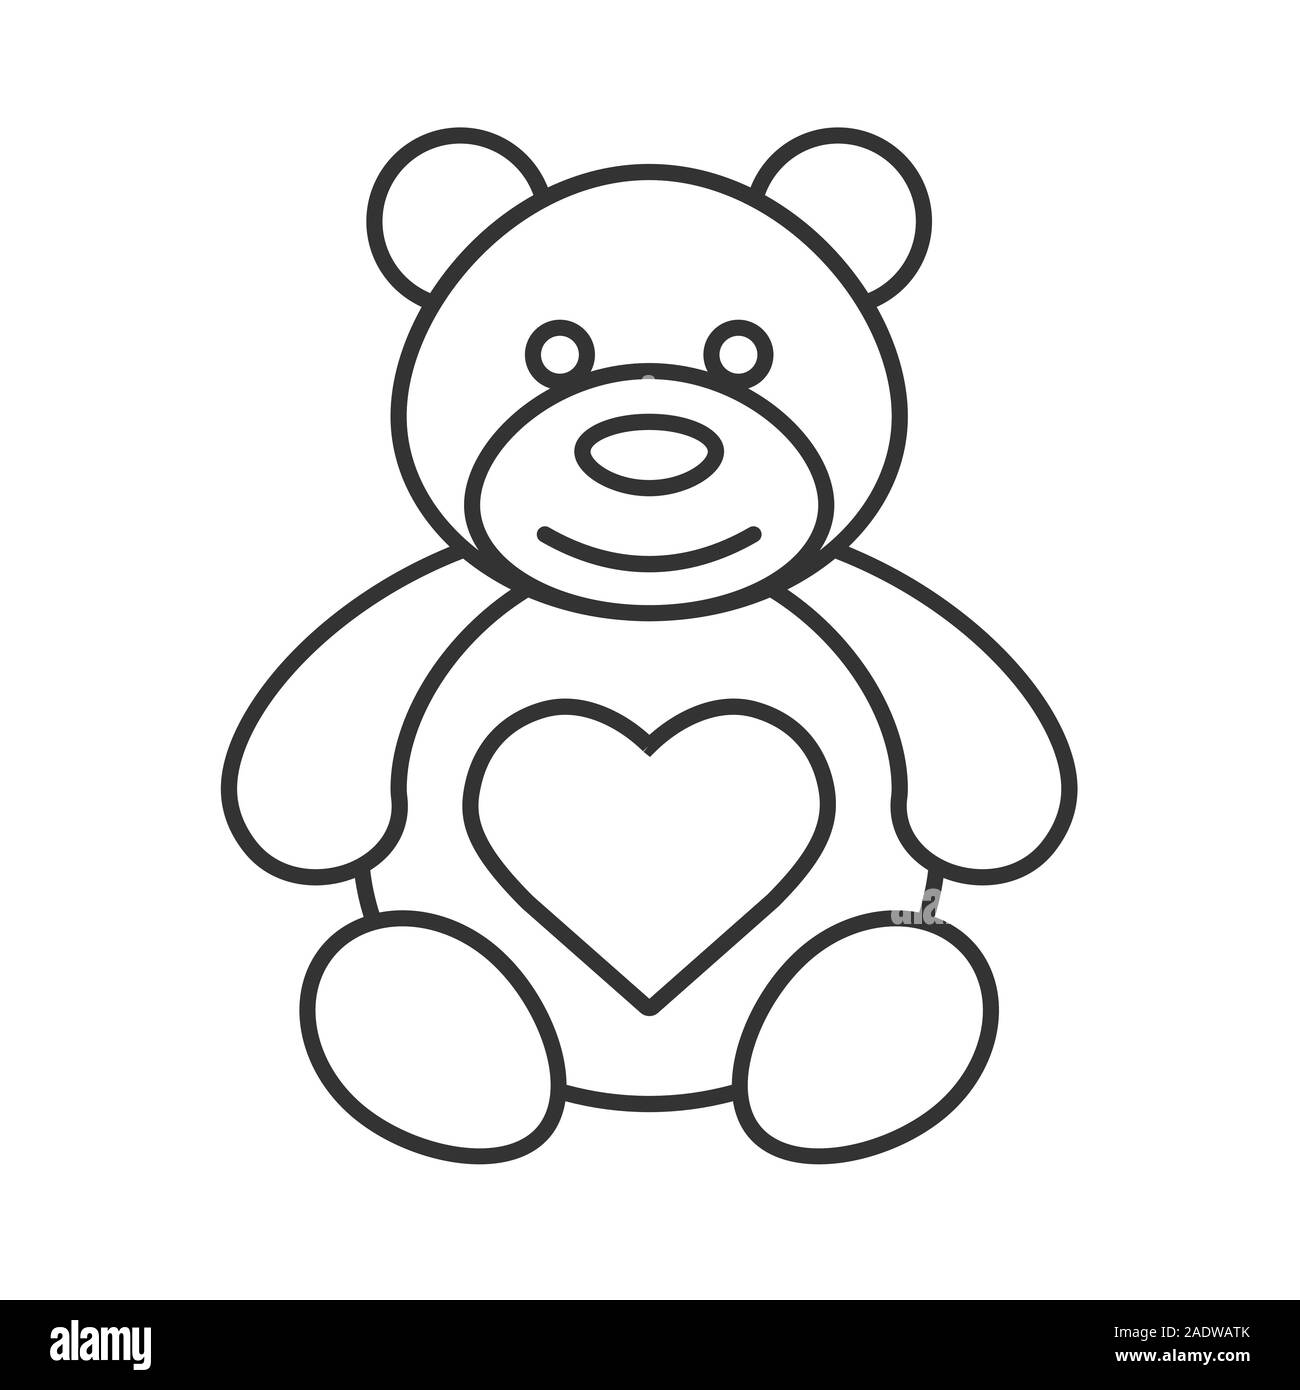 Teddy bear with heart shape linear icon. Thin line illustration. Contour symbol. Vector isolated outline drawing Stock Vector